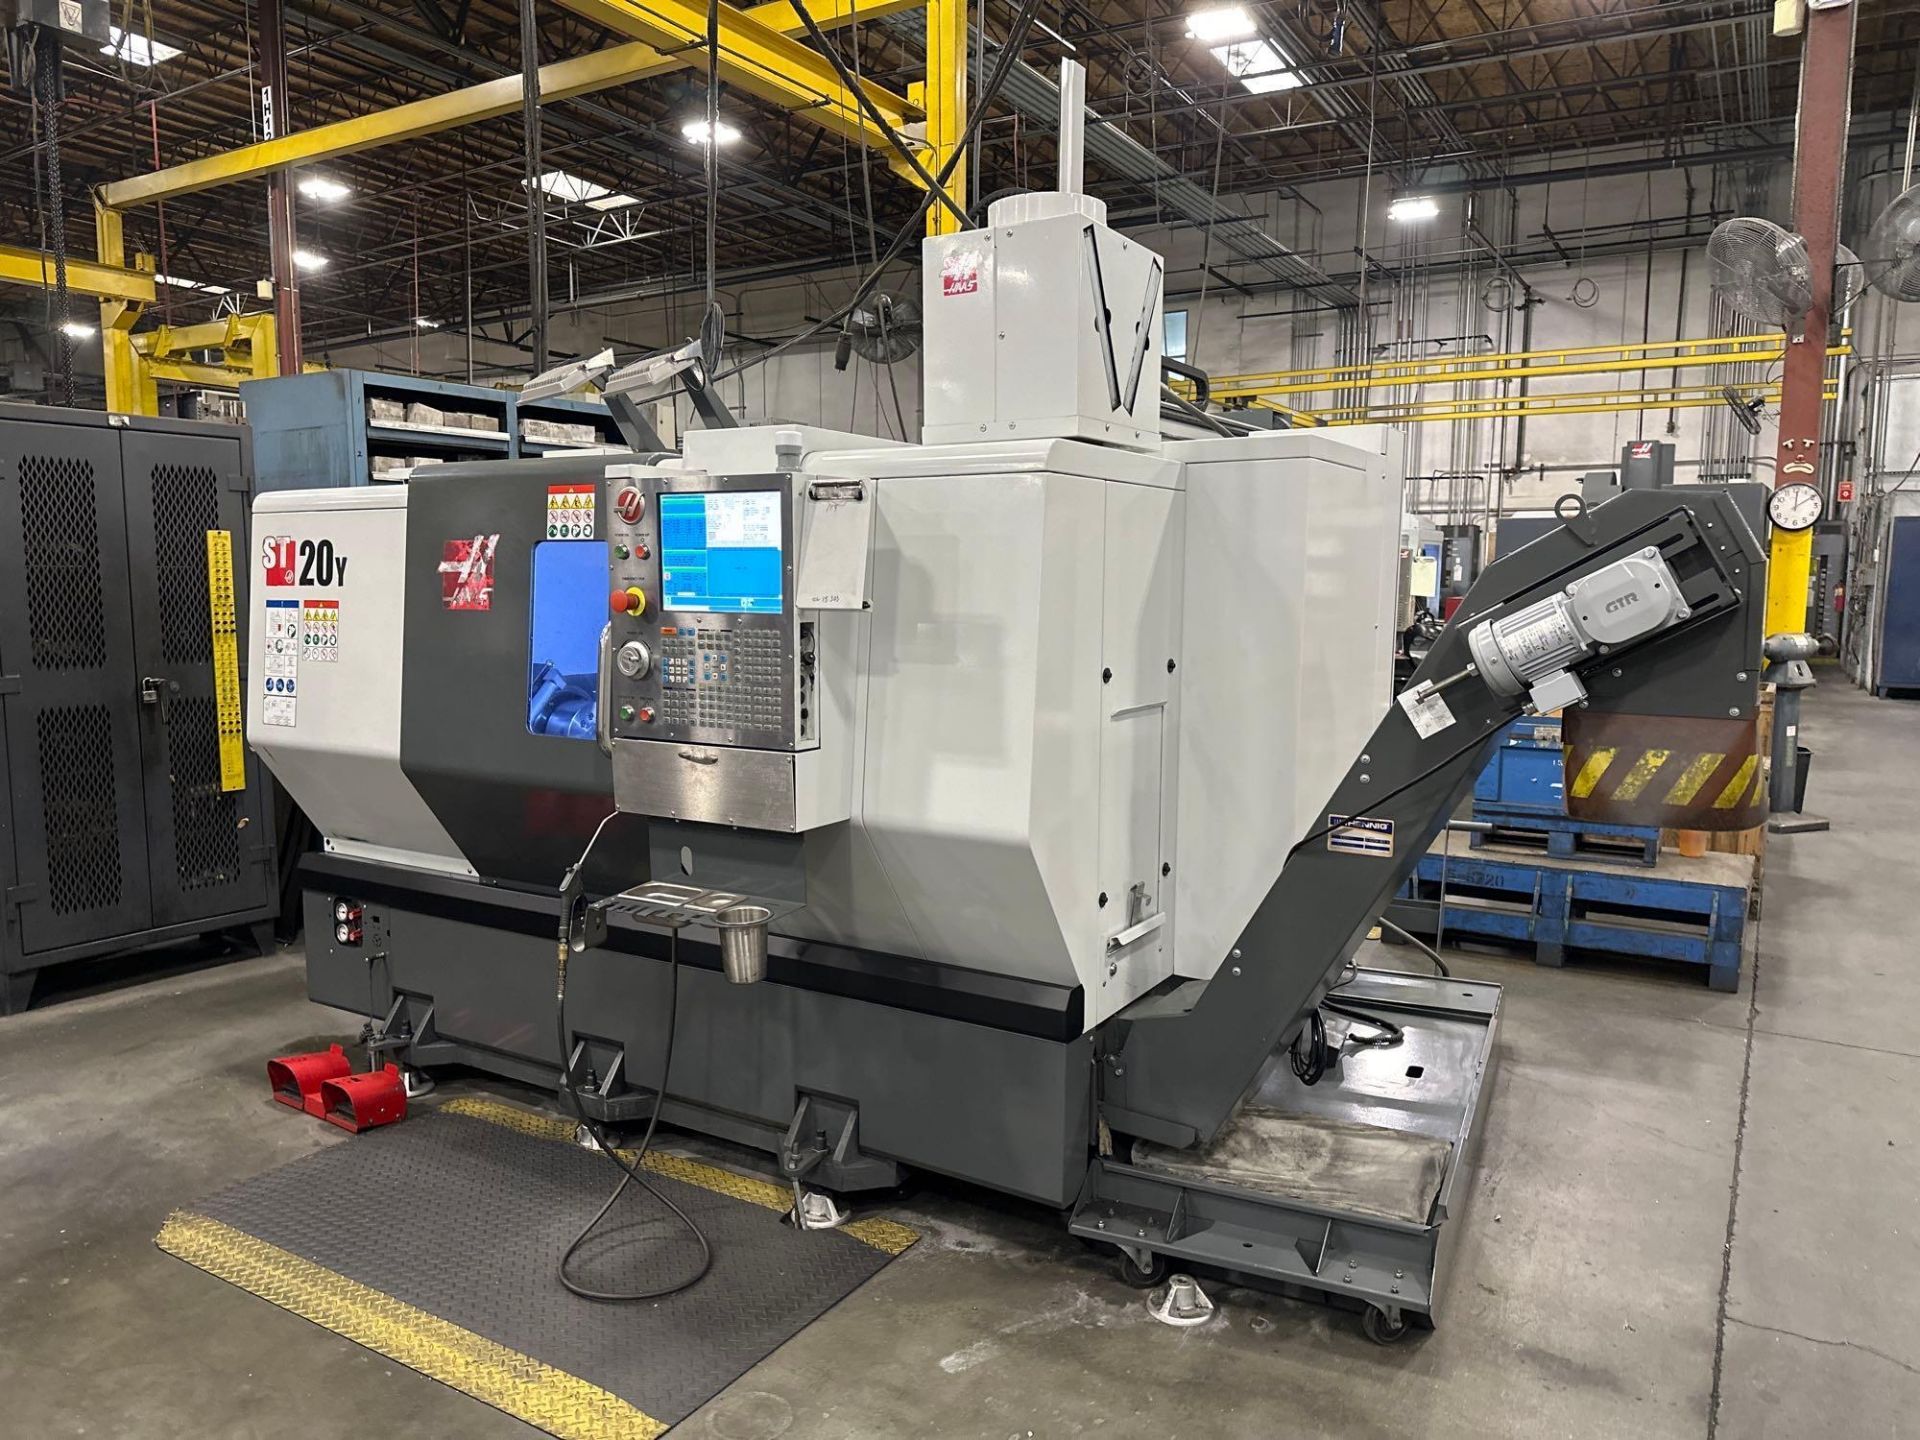 Haas ST-20Y CNC Lathe, VB24, 24 Station Turret. 4000RPM, 20HP, s/n 3106156, 2017 - Image 3 of 11